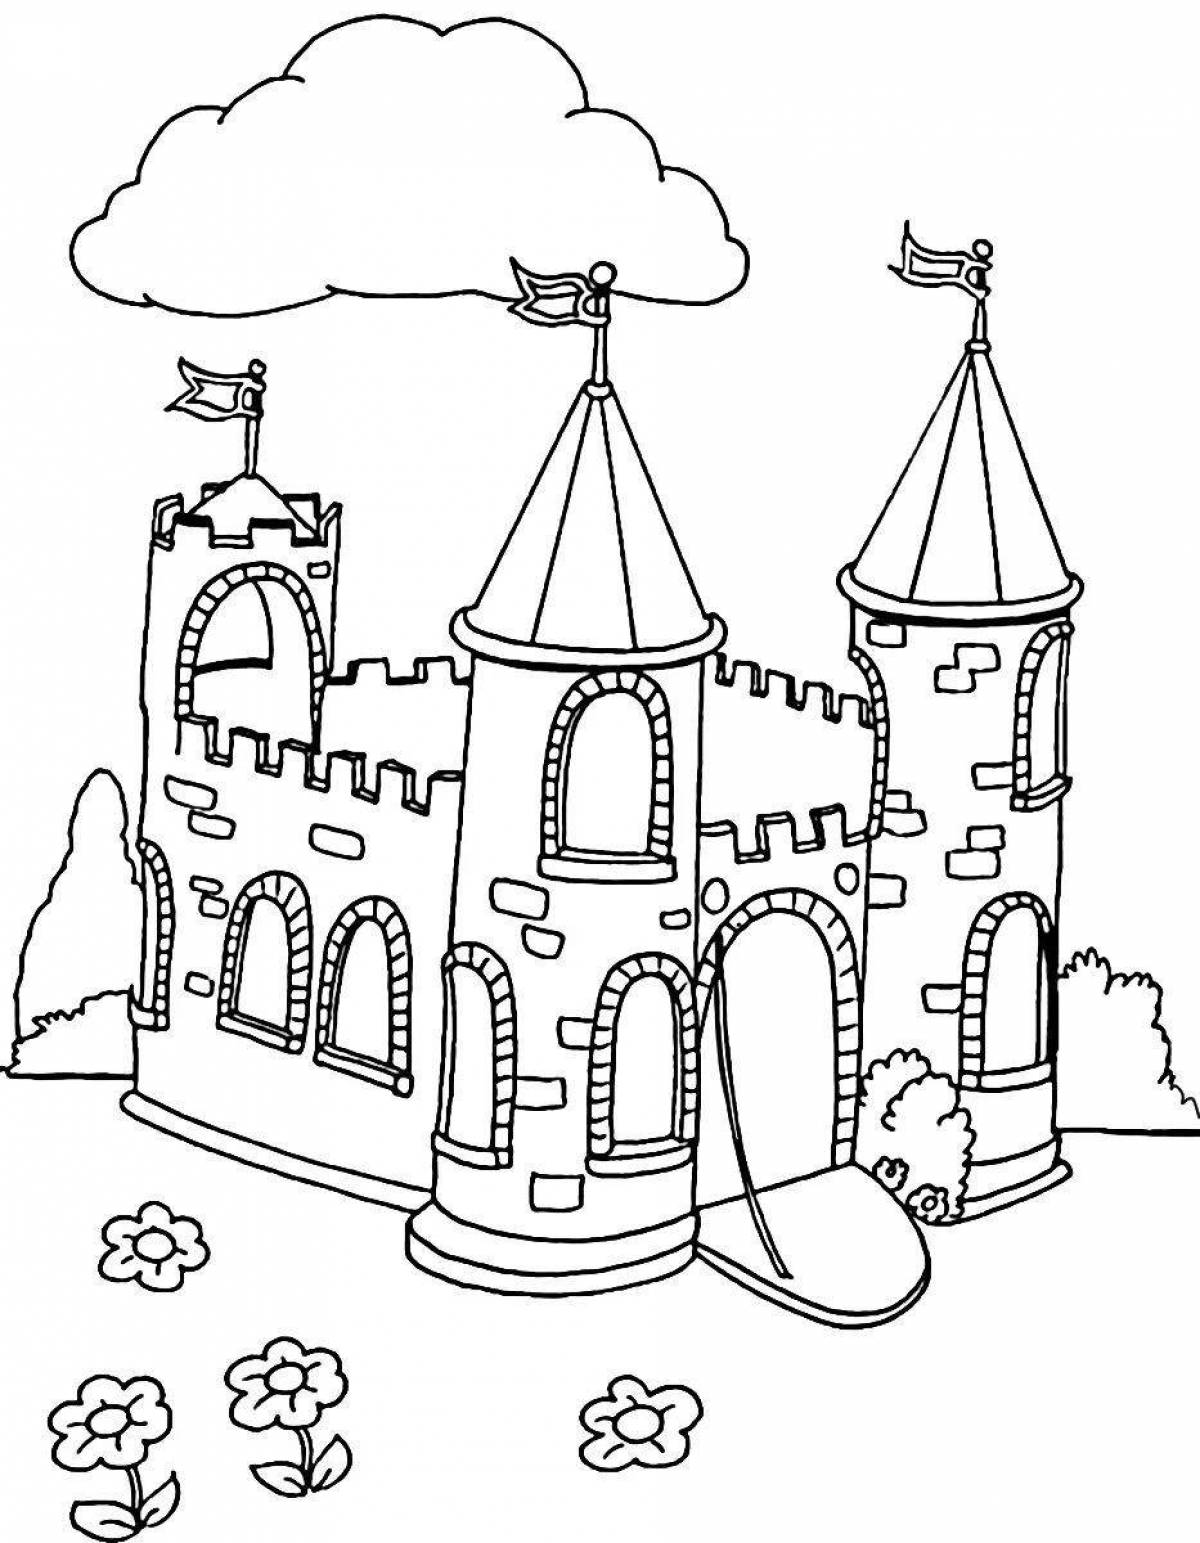 Colourful castle coloring book for children 4-5 years old